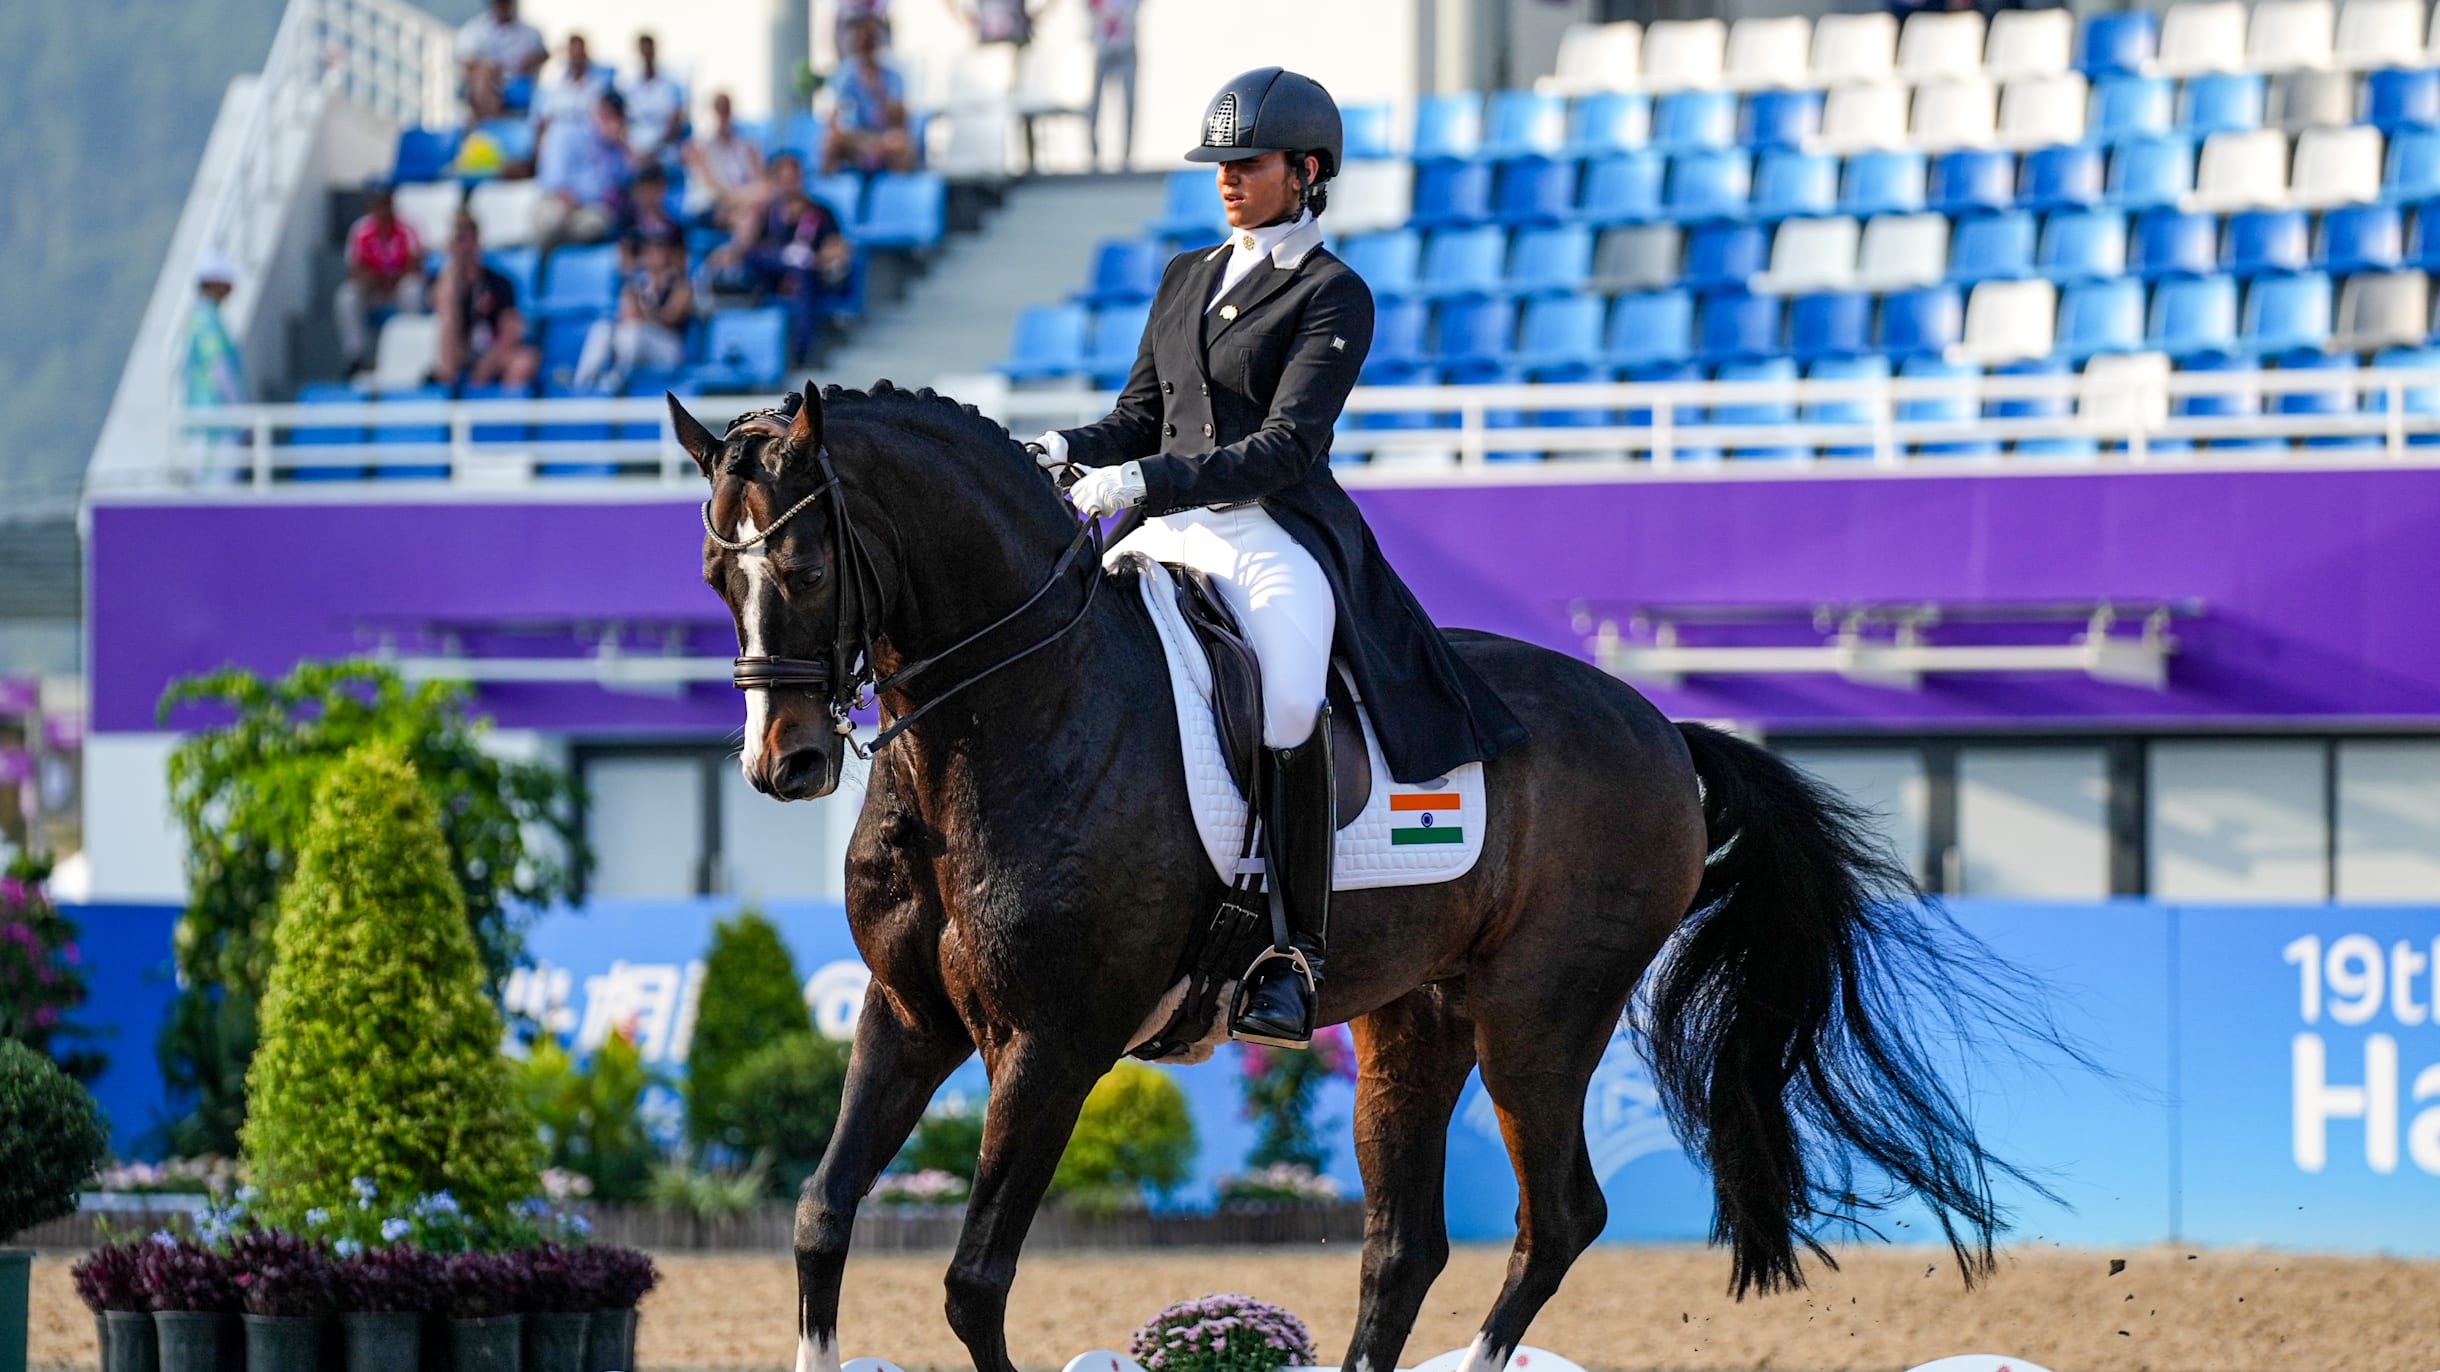 Equestrian: Know all about sport in which India won historic Asian Games  gold - Hindustan Times